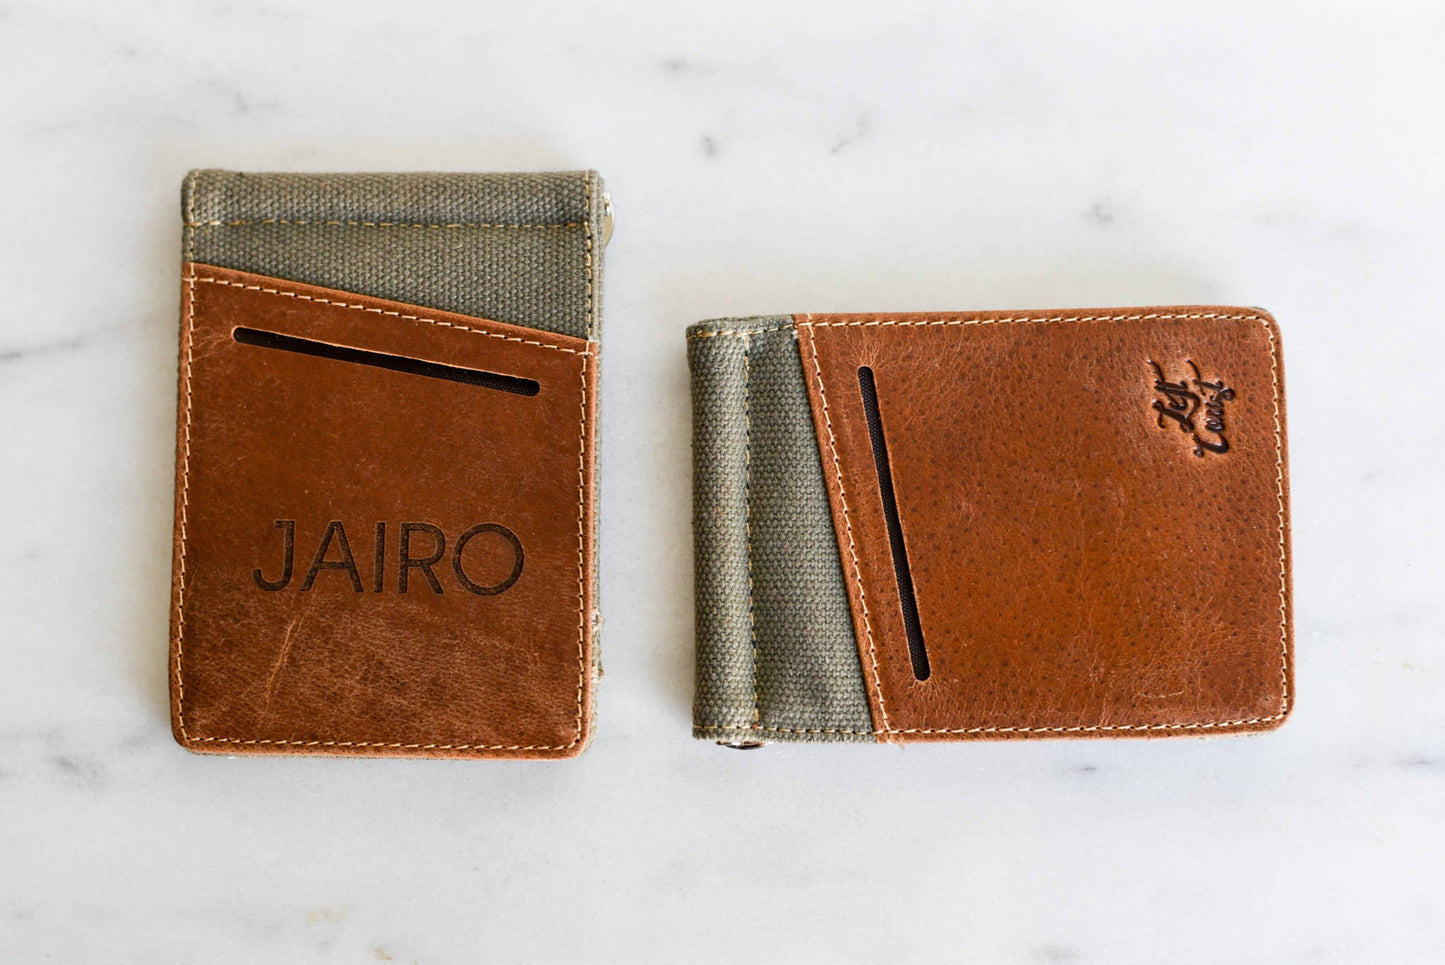 The Desoto Personalized Leather Slim Wallet